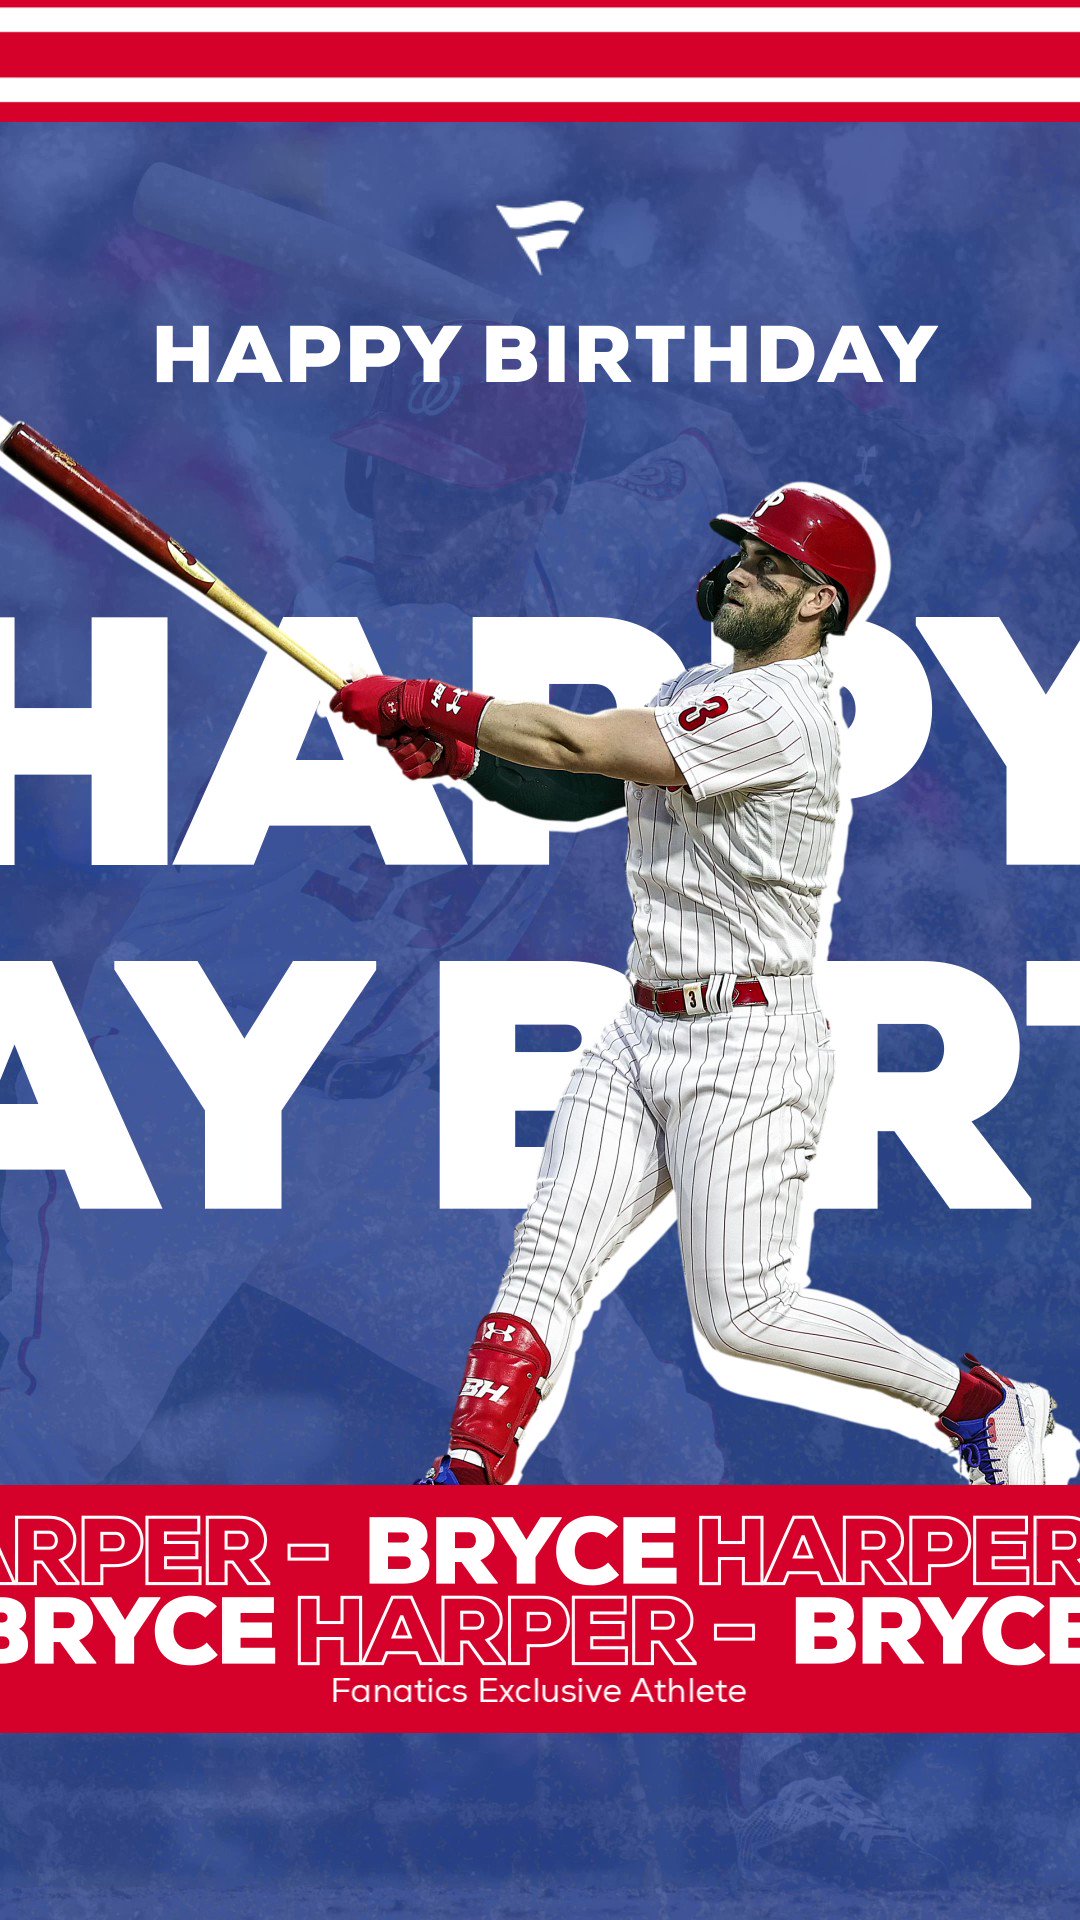 Fanatics Authentic on X: Happy Birthday to @phillies MV3 with an  extraordinary list of accolades and #FanaticsExclusive athlete Bryce Harper⚾️🥳🎉🎂  #HBD #HappyBirthday #PhiladelphiaPhillies #MLB #Fanatics   / X